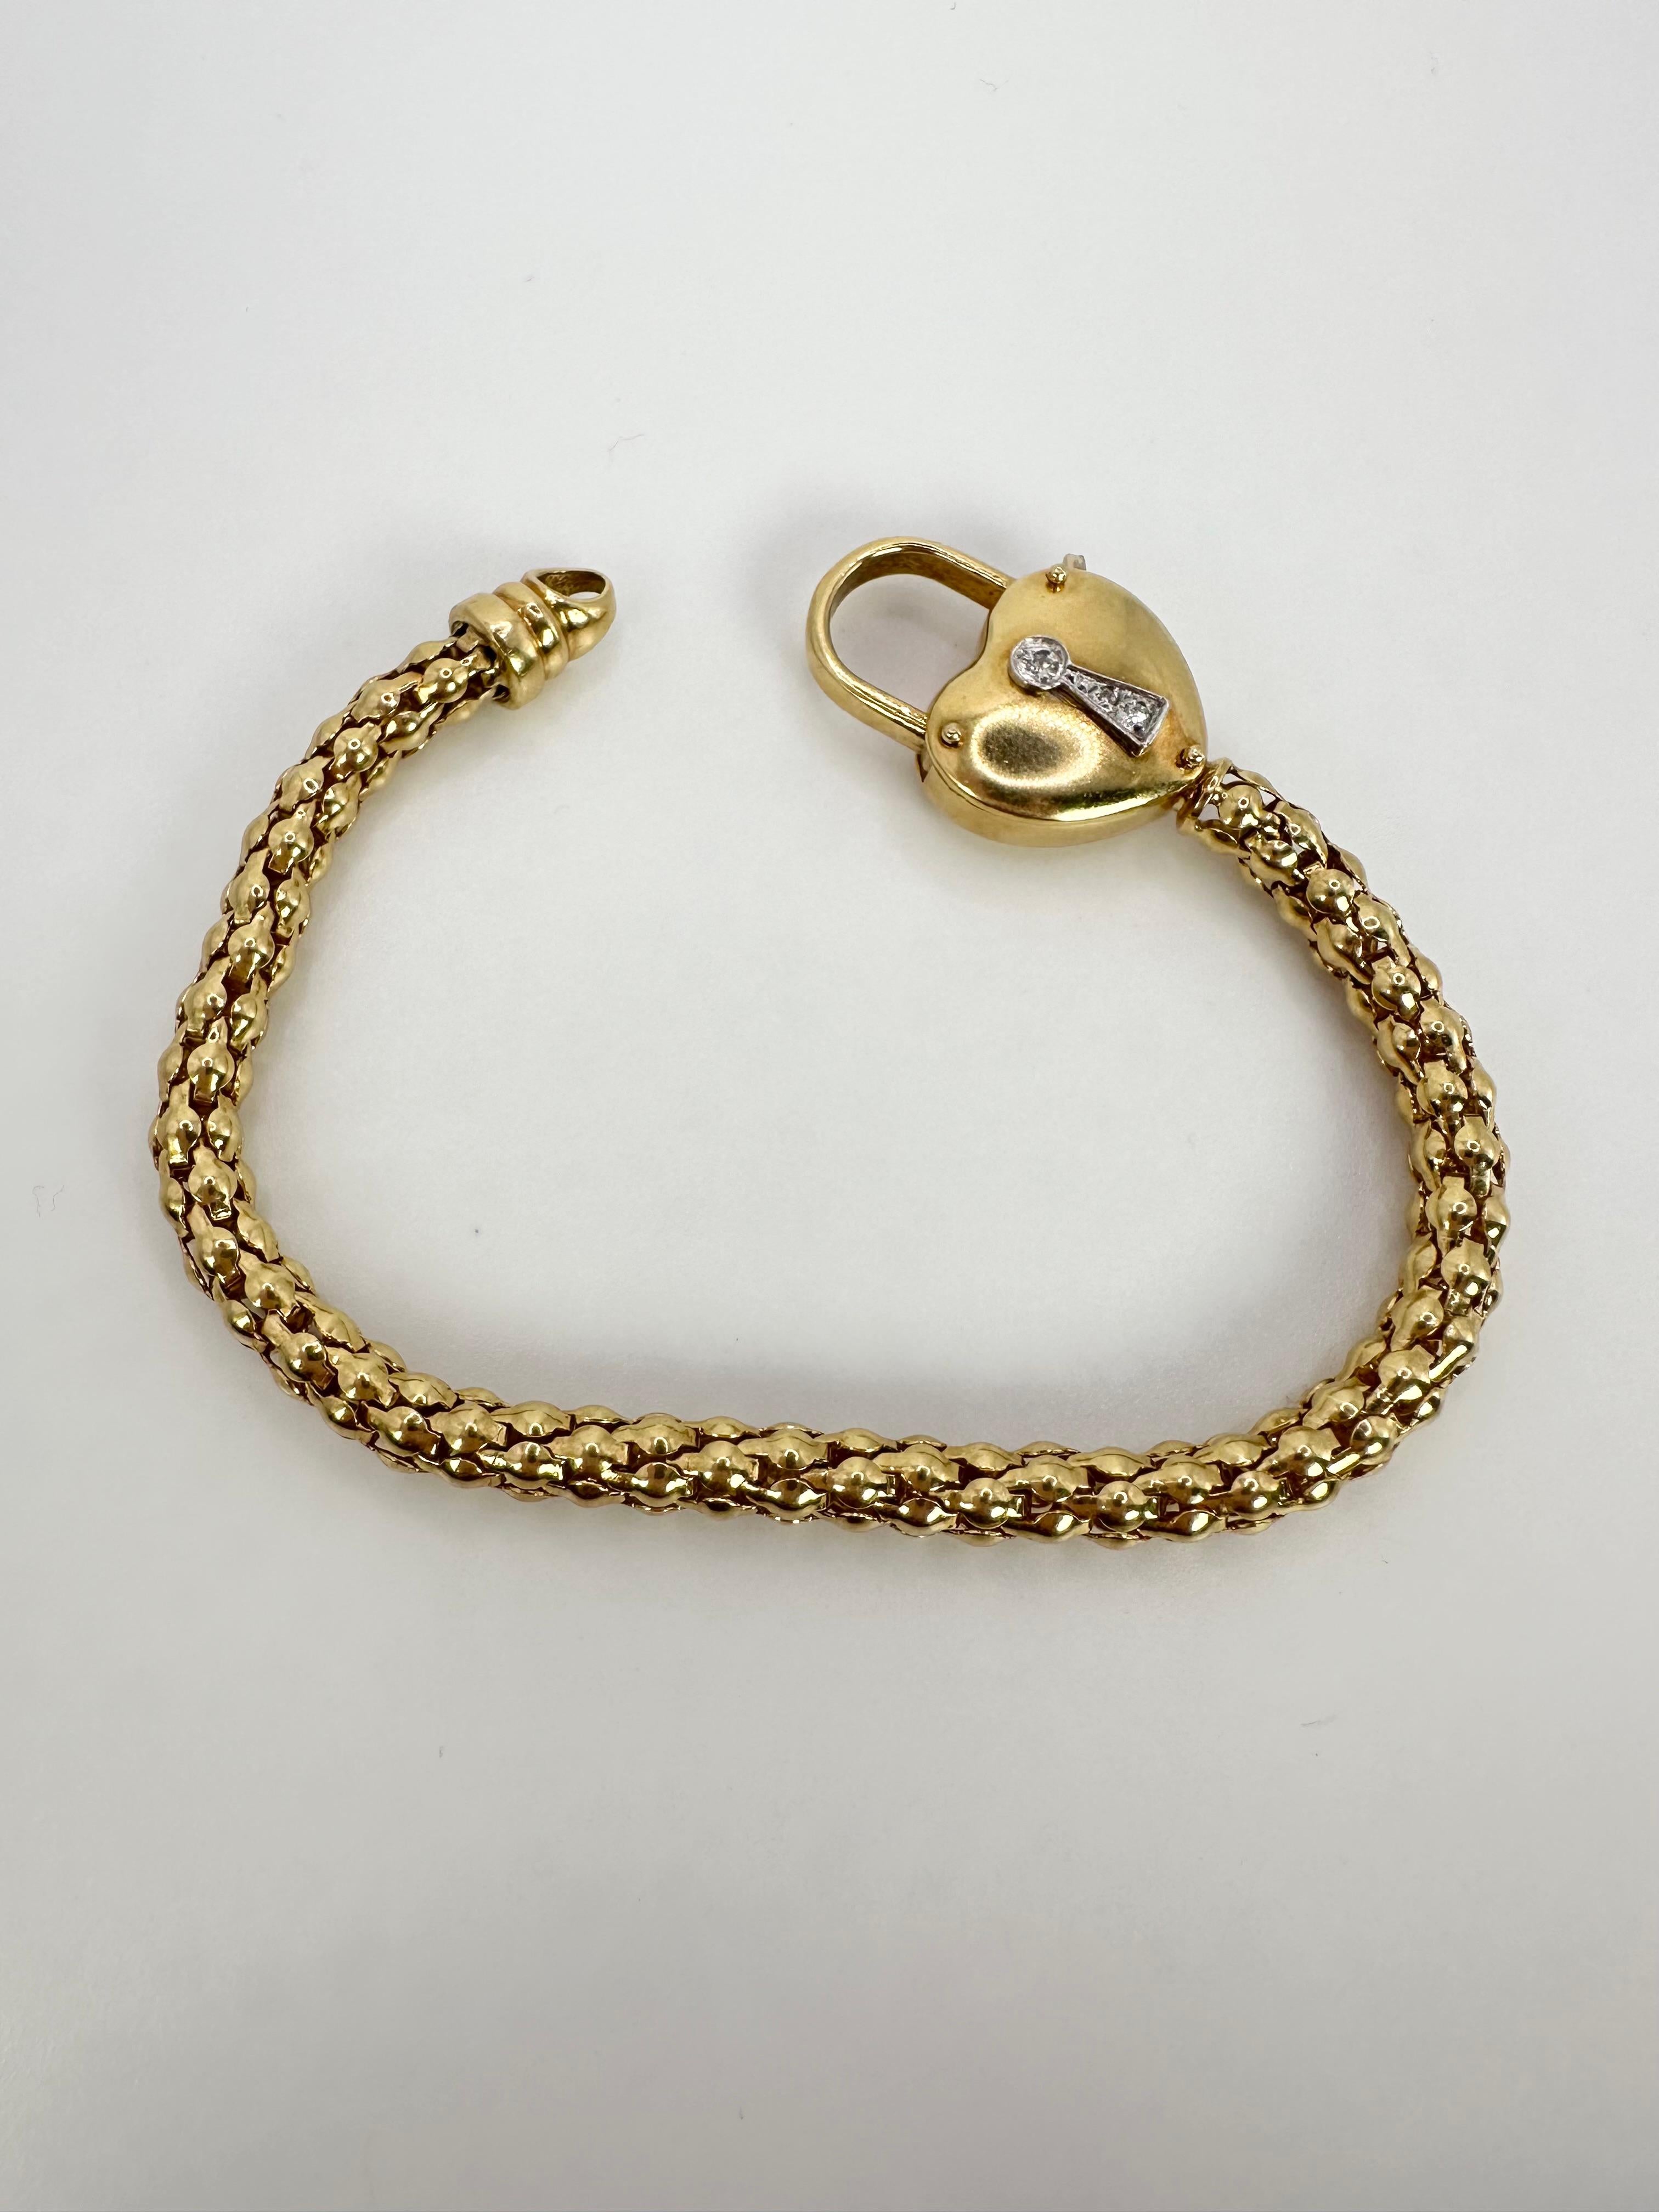 Estate Le Gi, stunning heart bracelet in 18kt yellow gold.
GRAM WEIGHT: 18.75
METAL: 14KT yellow gold

NATURAL DIAMOND(S)
Cut: Round Brilliant
Color: G-H 
Clarity: SI 
Carat: 0.35ct
Length: 7.75”
Item number: 440-00038 OKR


WHAT YOU GET AT STAMPAR